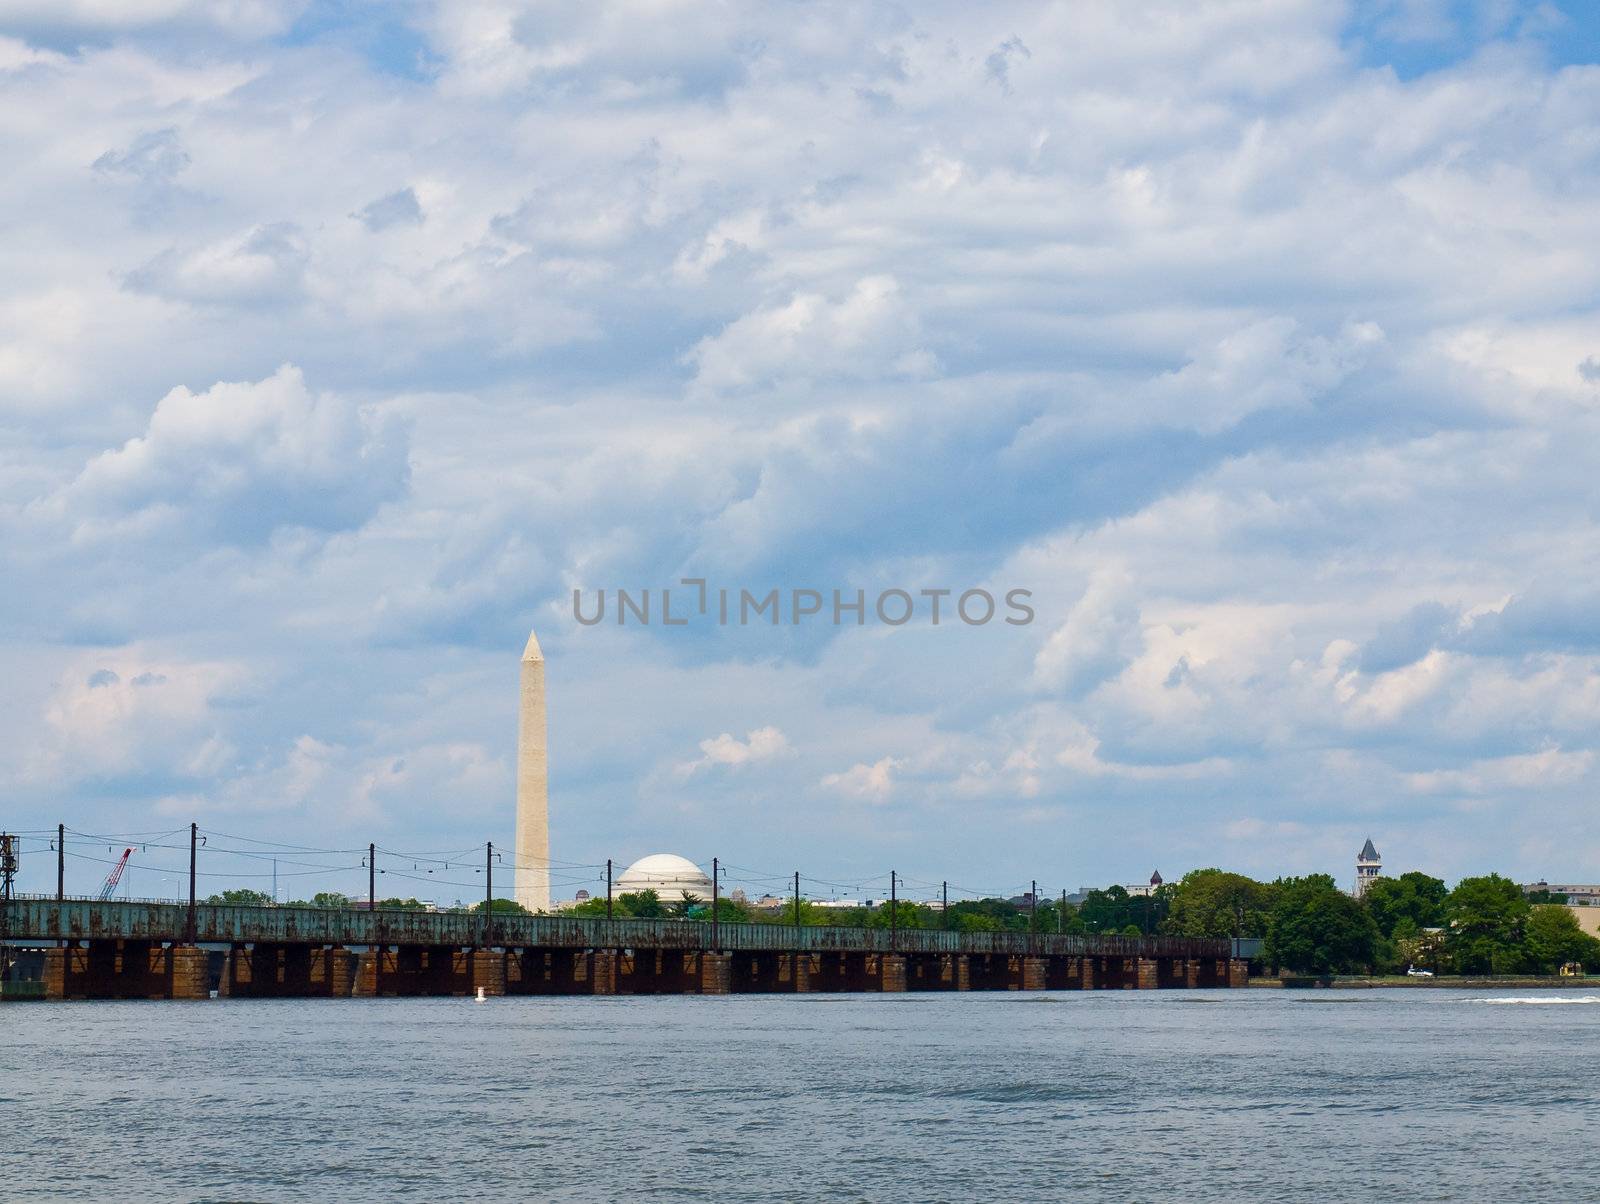 The Washington Monument and Jefferson Memorial in Washington DC as Seen from the Potomac River